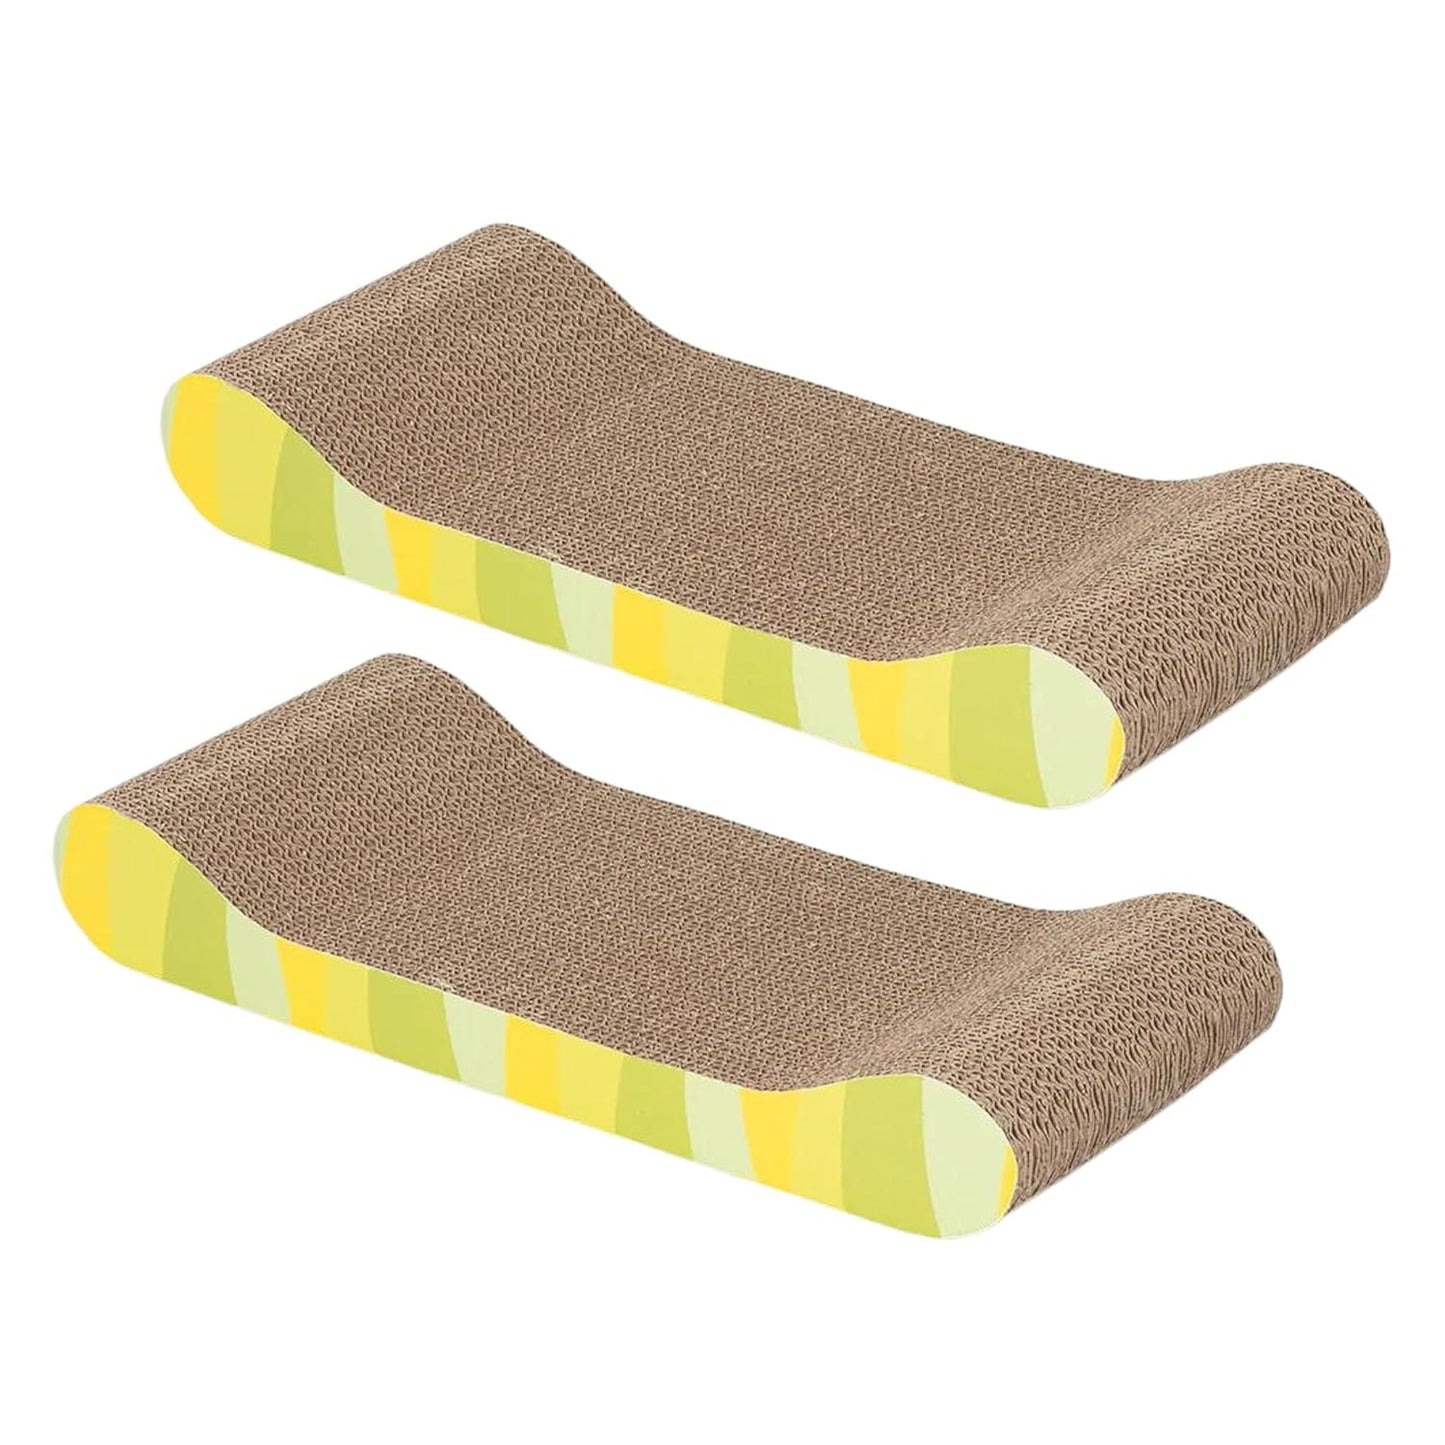 Foodie Puppies Corrugated Couch Scratcher for Cats & Kittens, Pack of 2